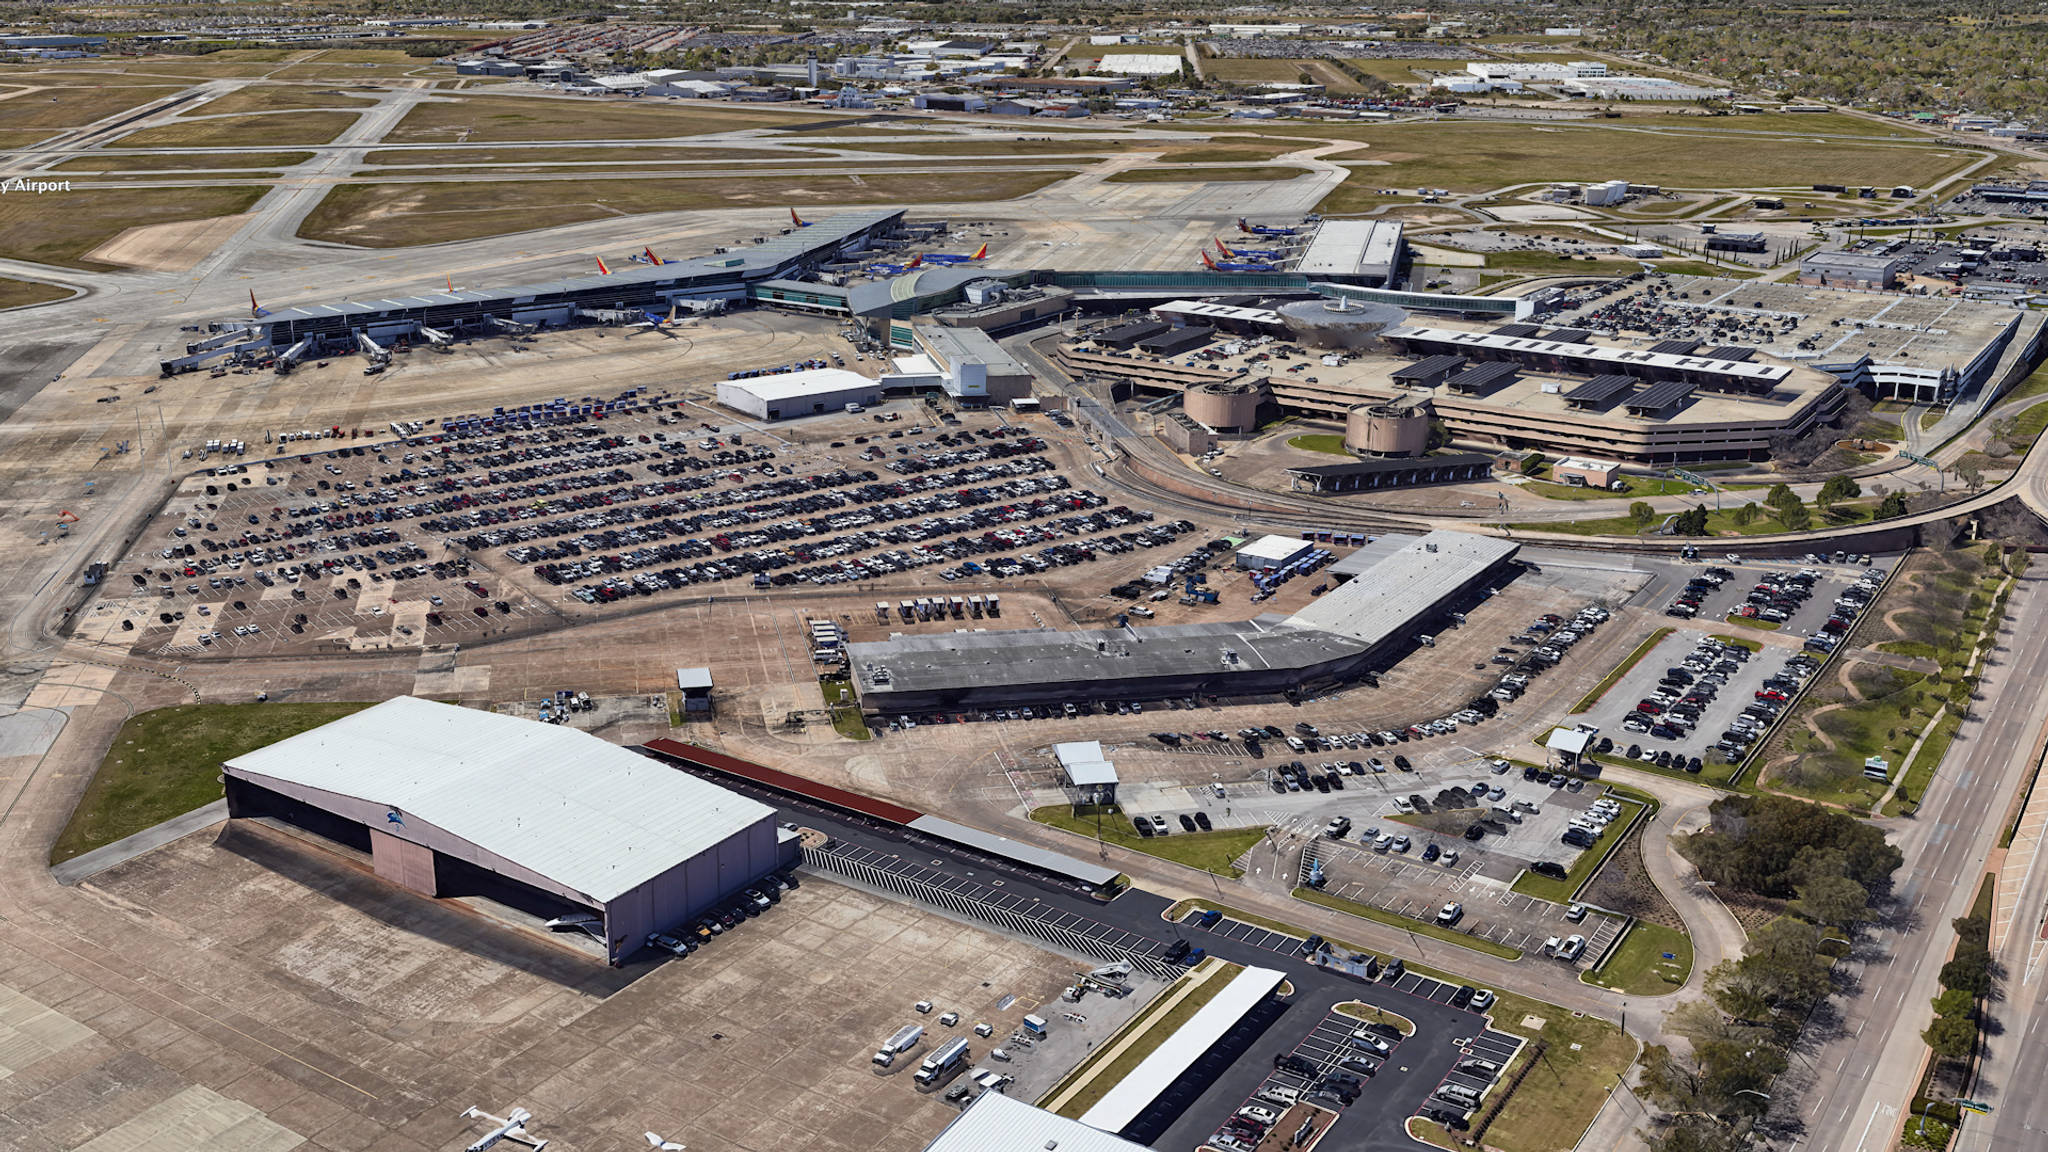  Aerial View of Houston Hobby Airport Parking